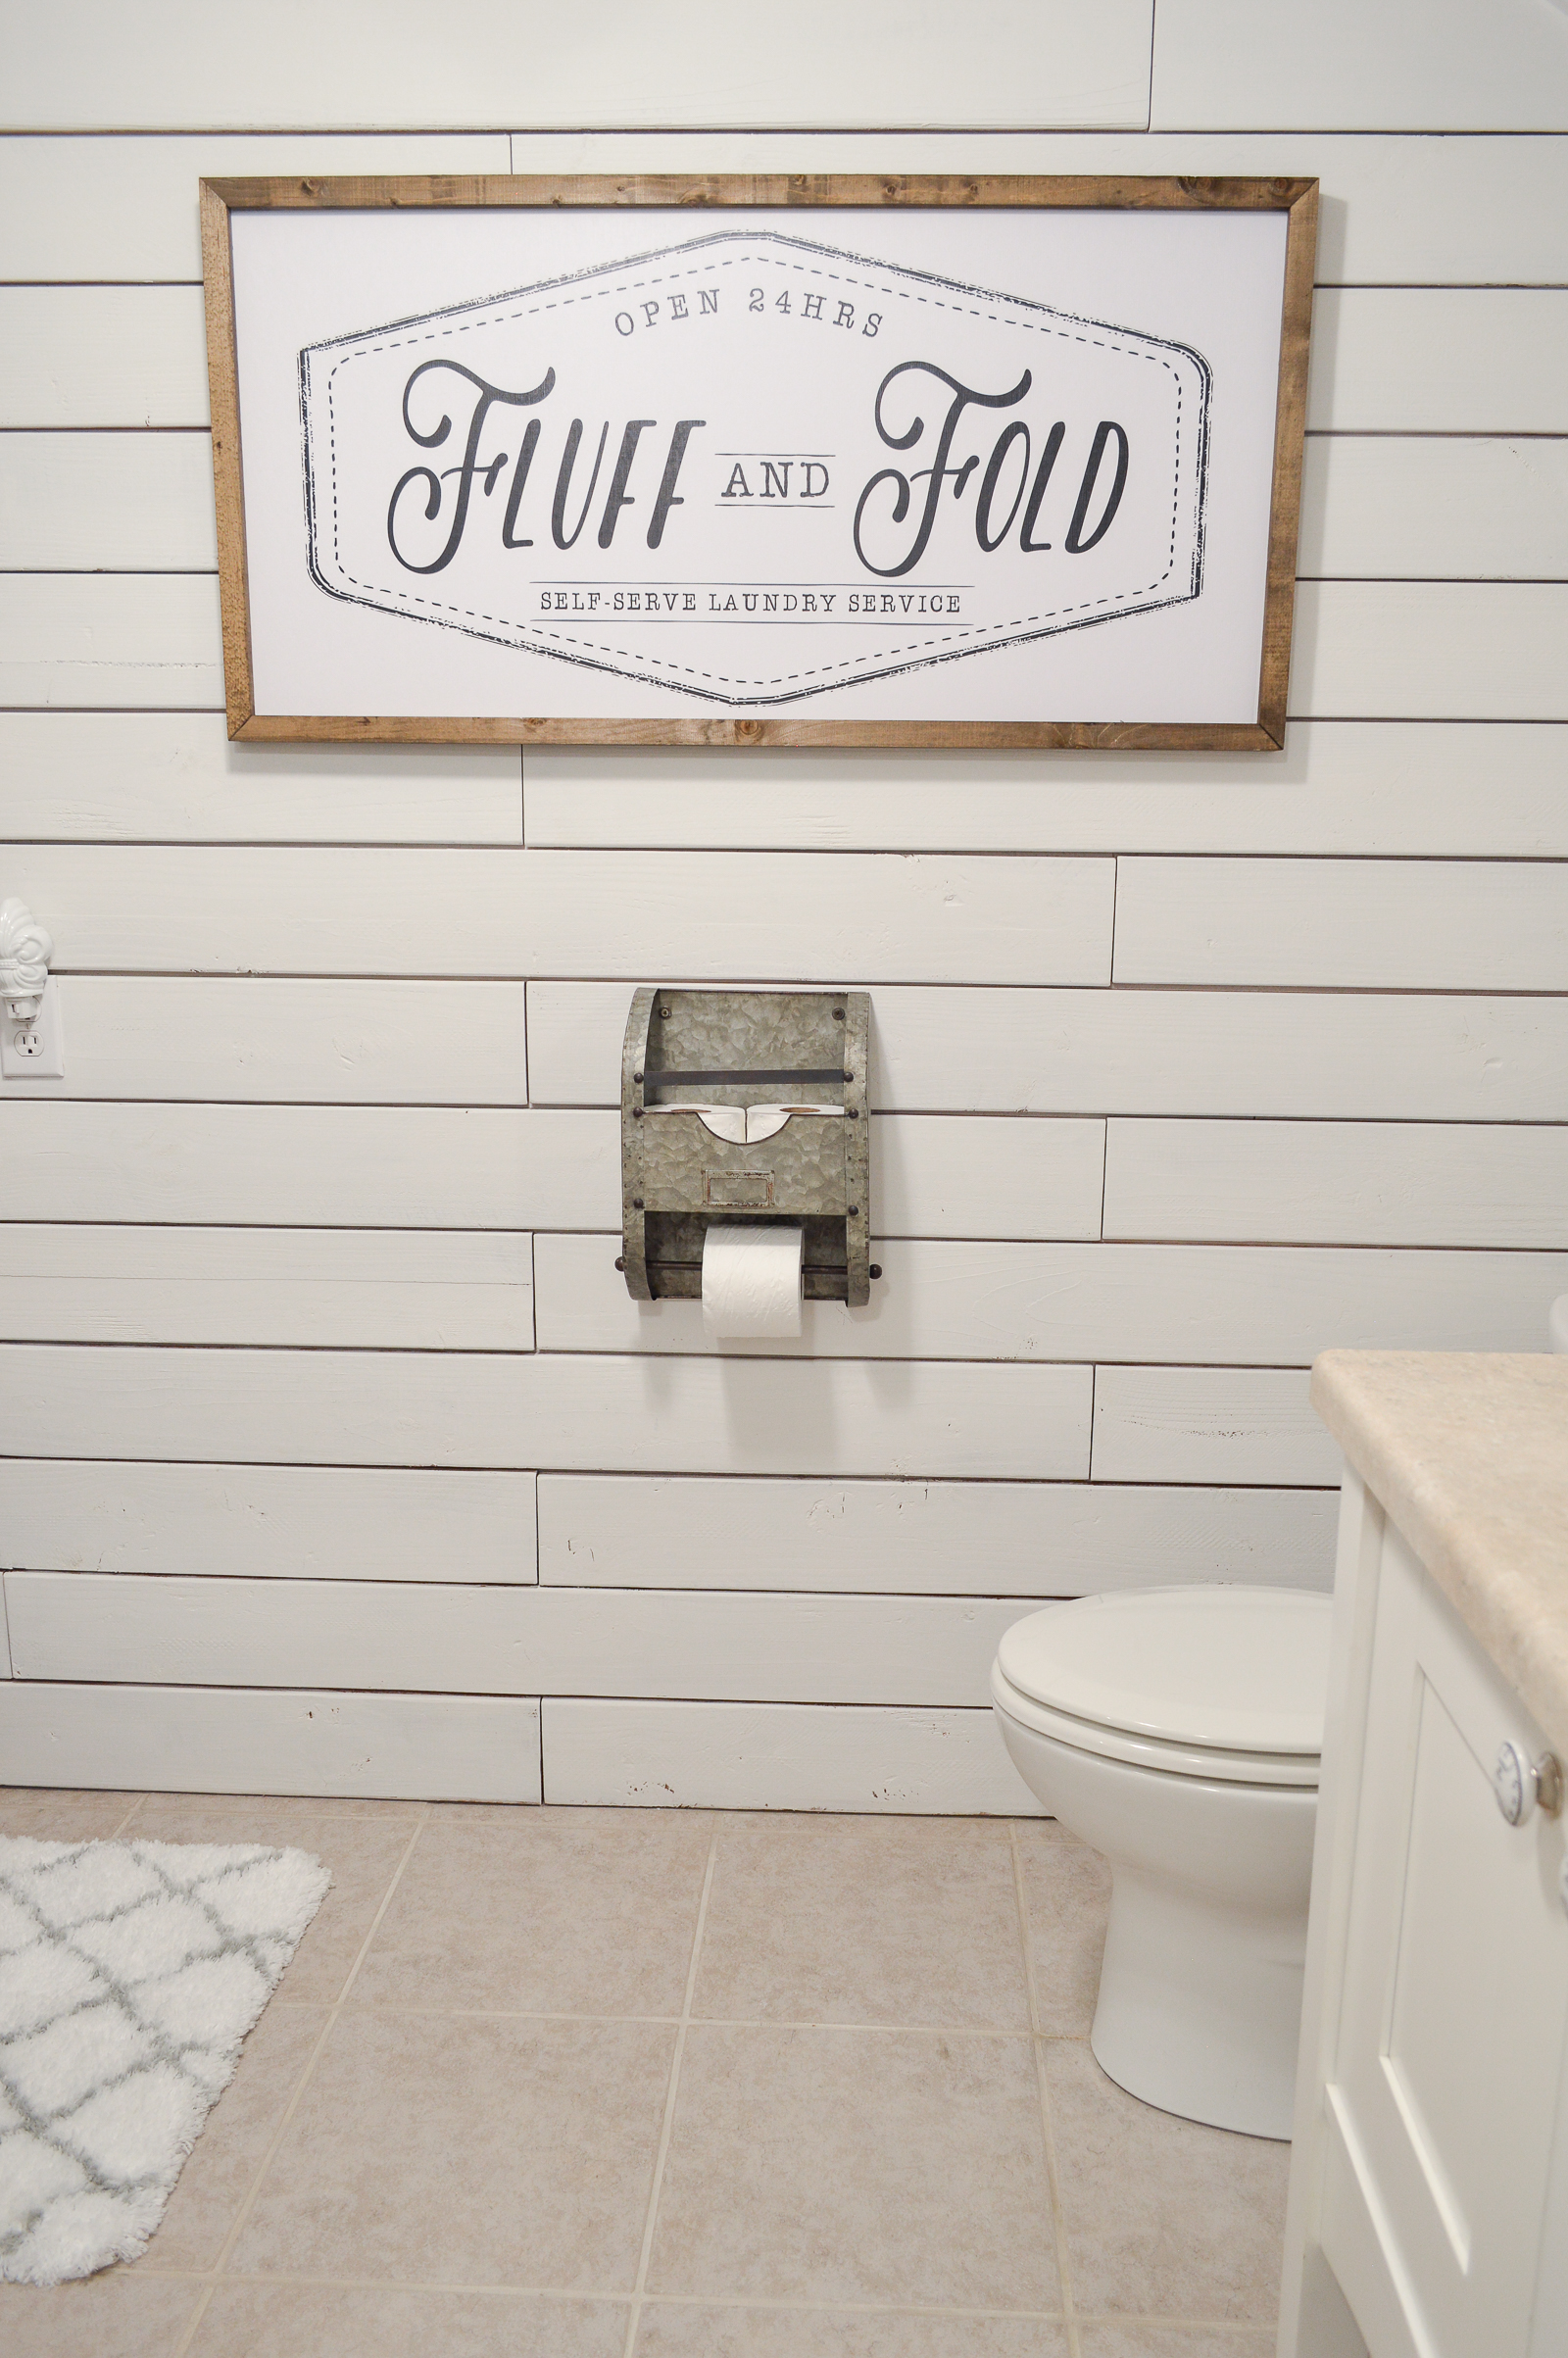 Small Space Combination Laundry Powder Bath Room Refresh - Simple, Organized Cottage Farmhouse Makeover with affordable pieces from the Better Homes & Gardens line at Walmart #sponsored | Details and sources www.foxhollowcottage.com 